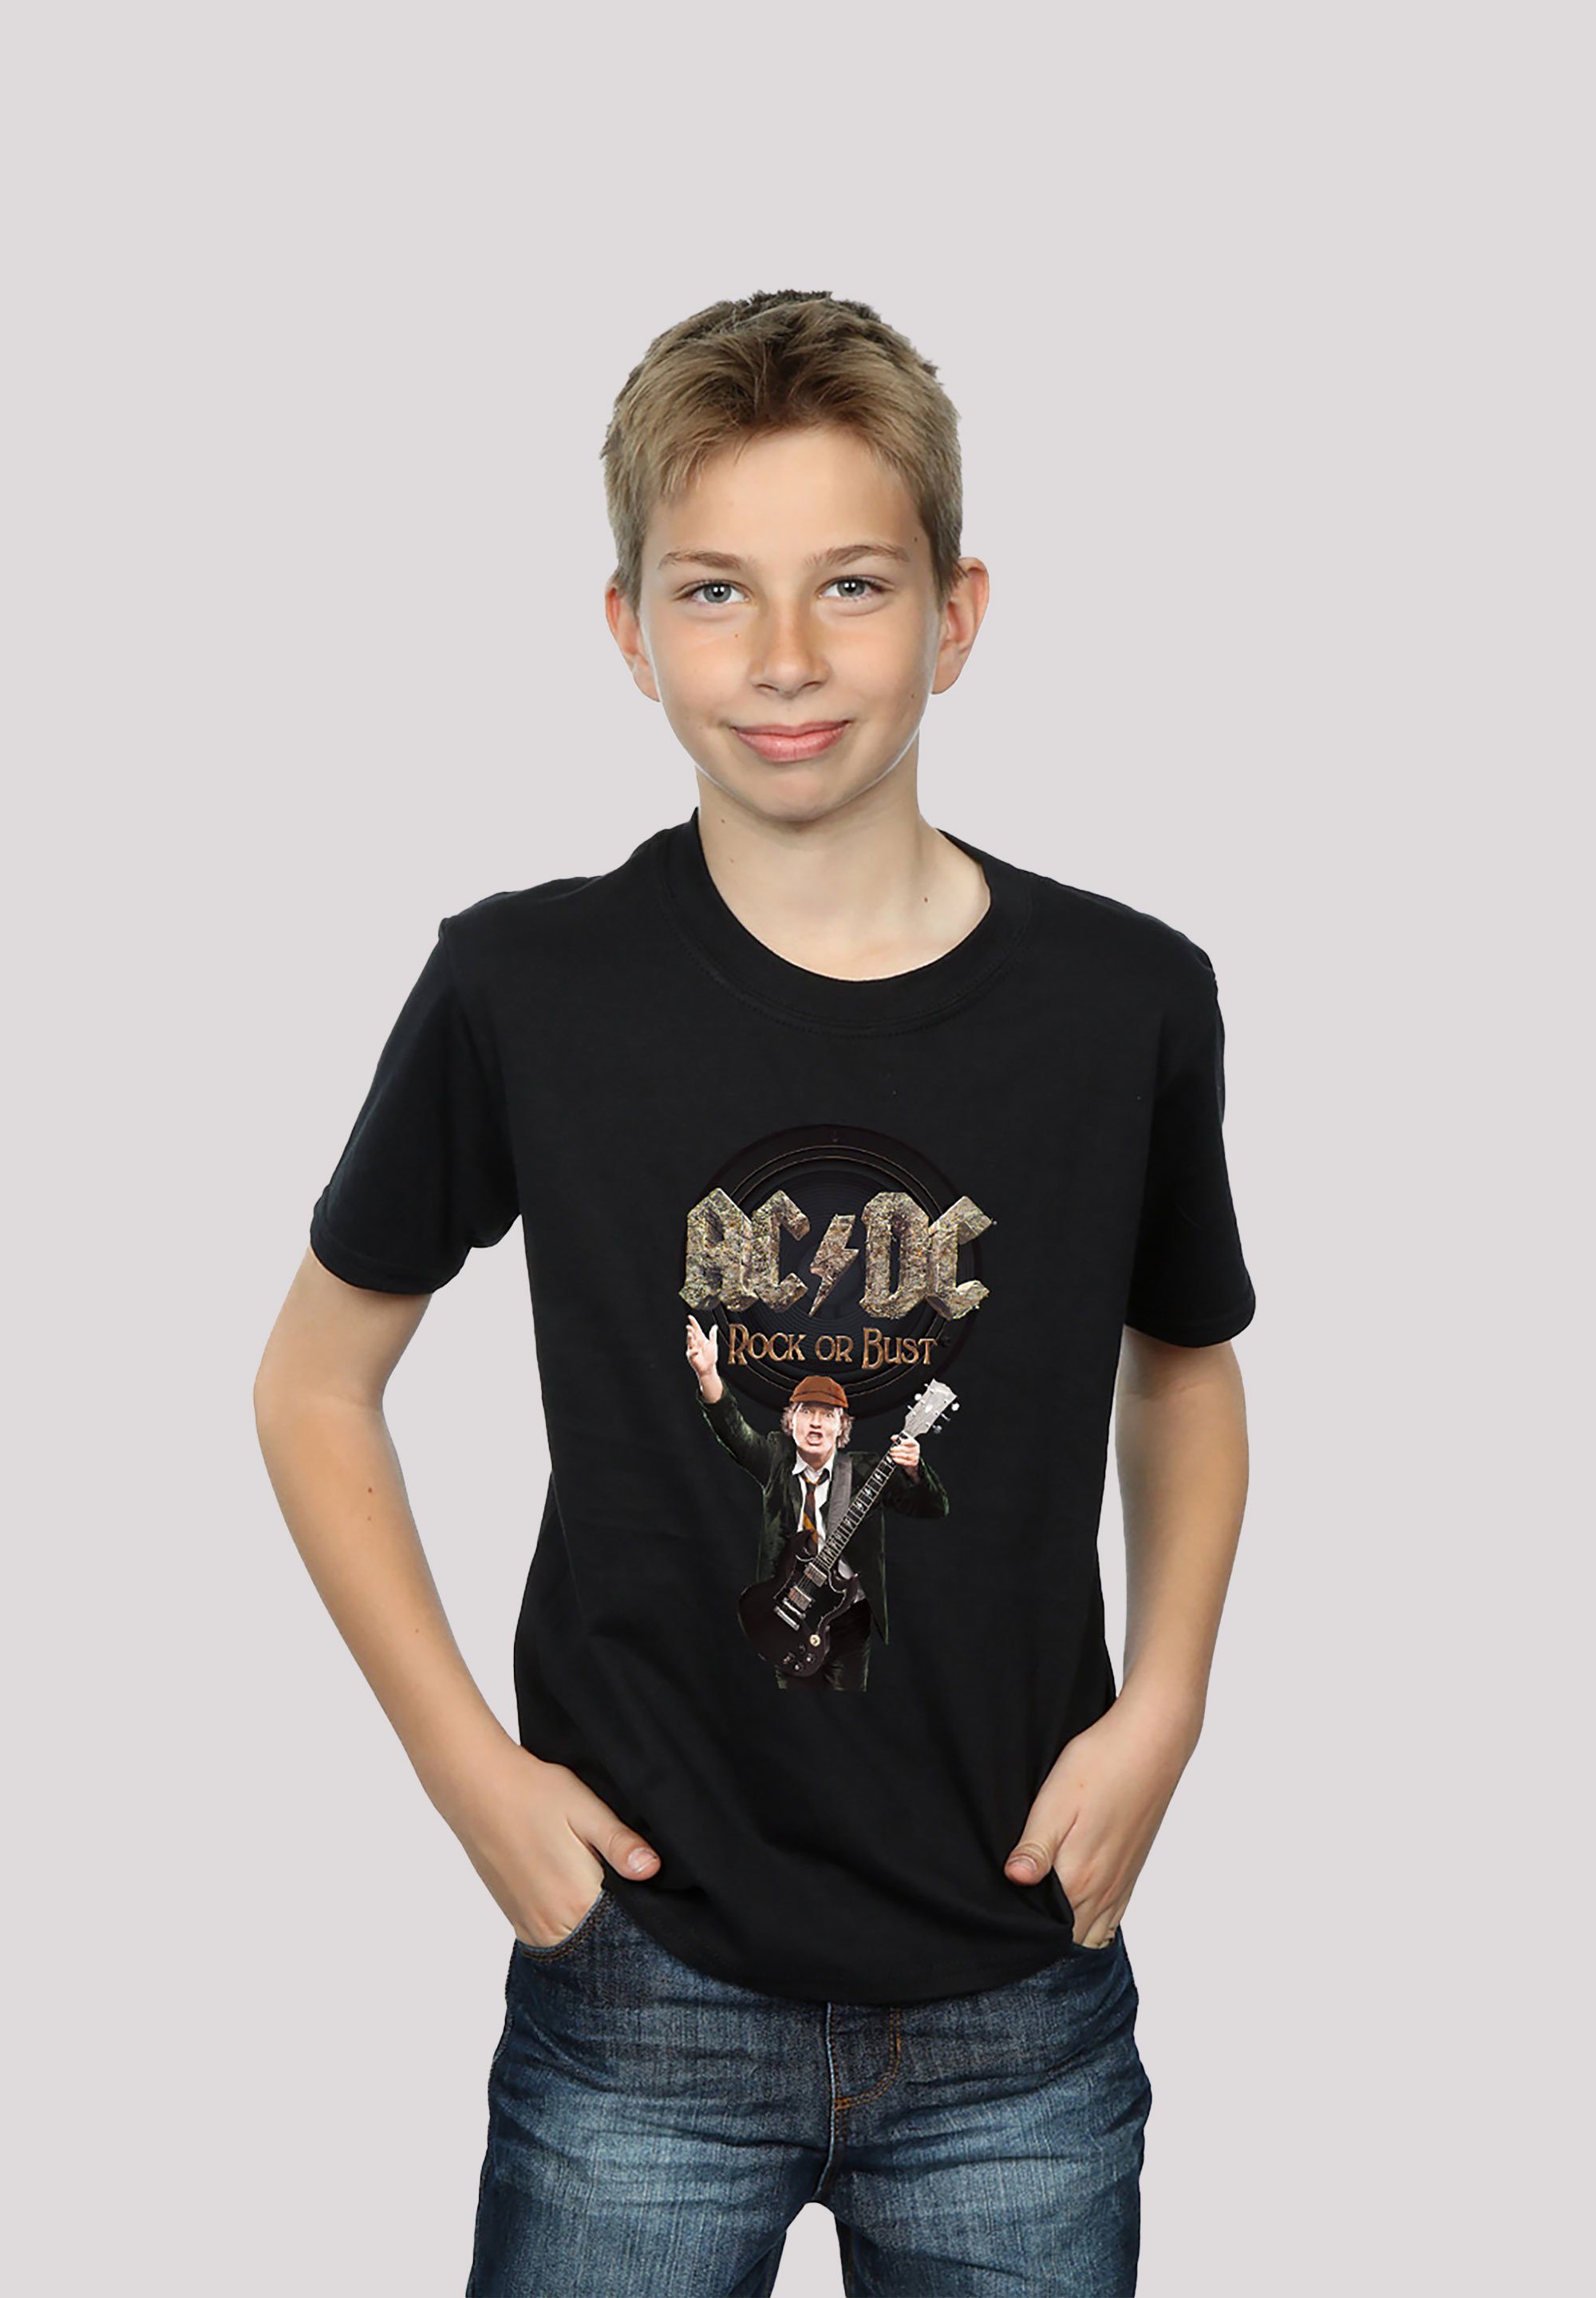 F4NT4STIC T-Shirt ACDC Kinder Herren Print Angus & Bust Rock Young Or für